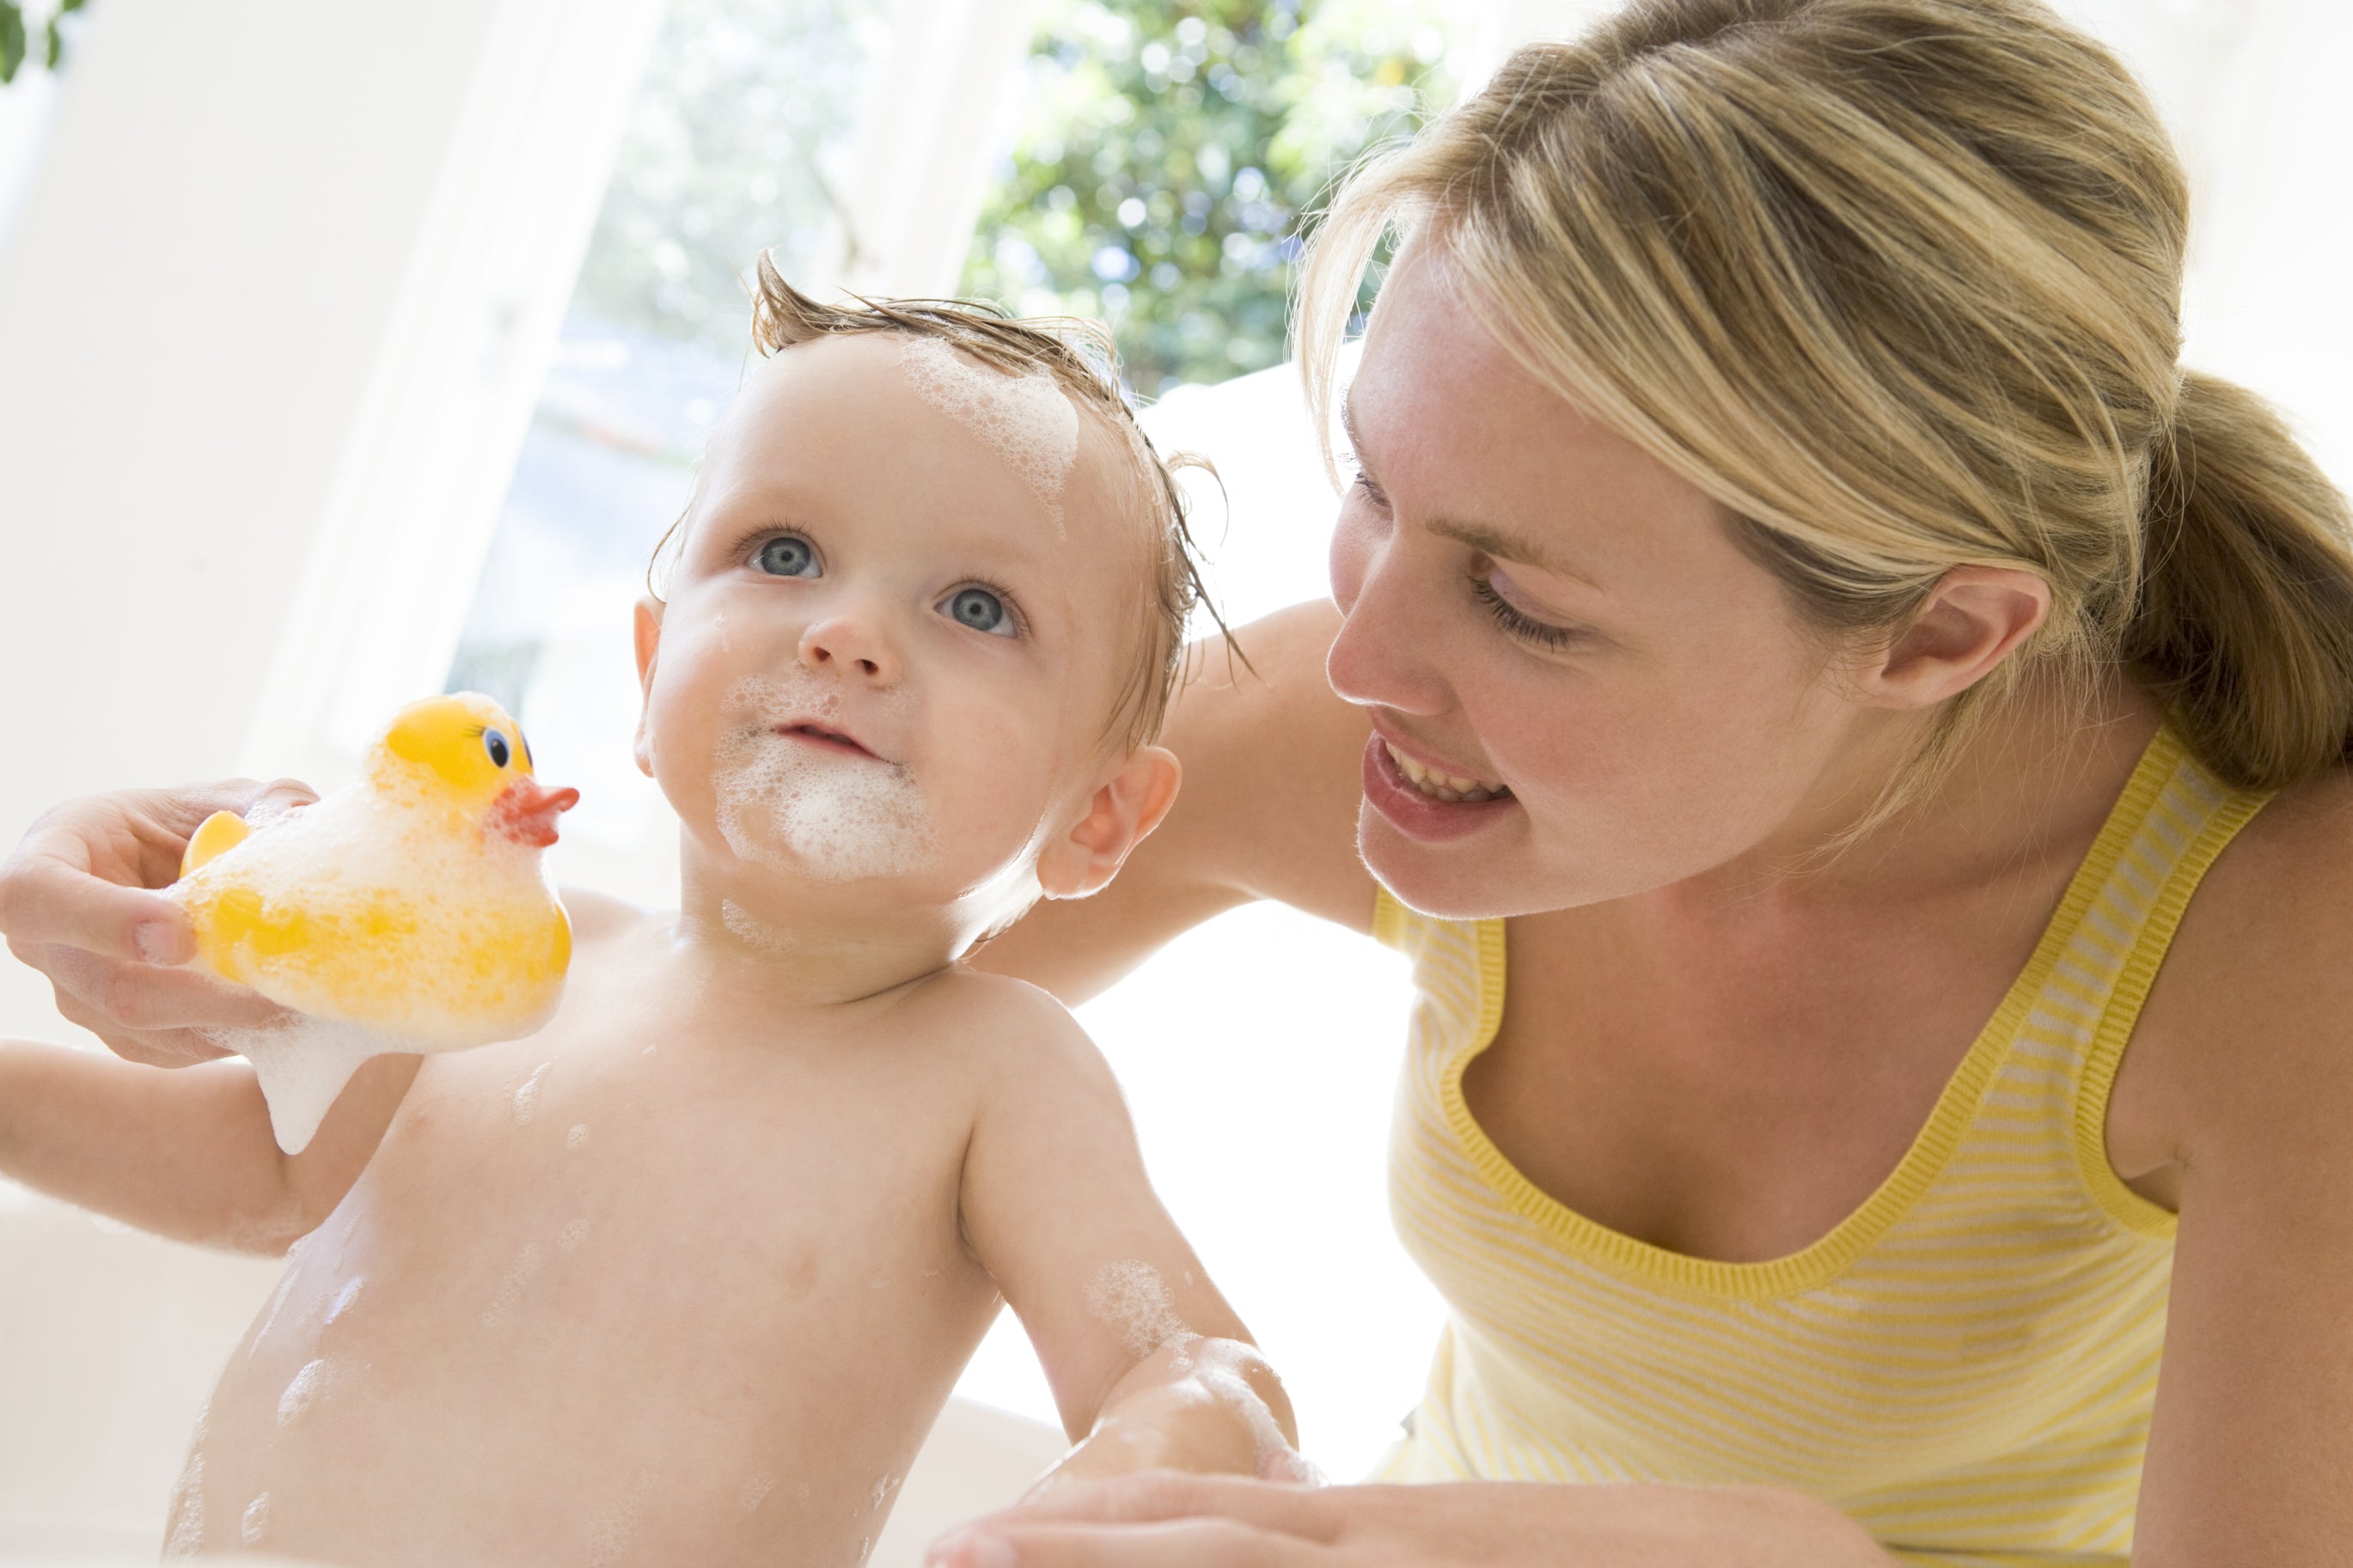 A baby over six months old accompanied by his mother holds a rubber duck and stands in the bubble bath